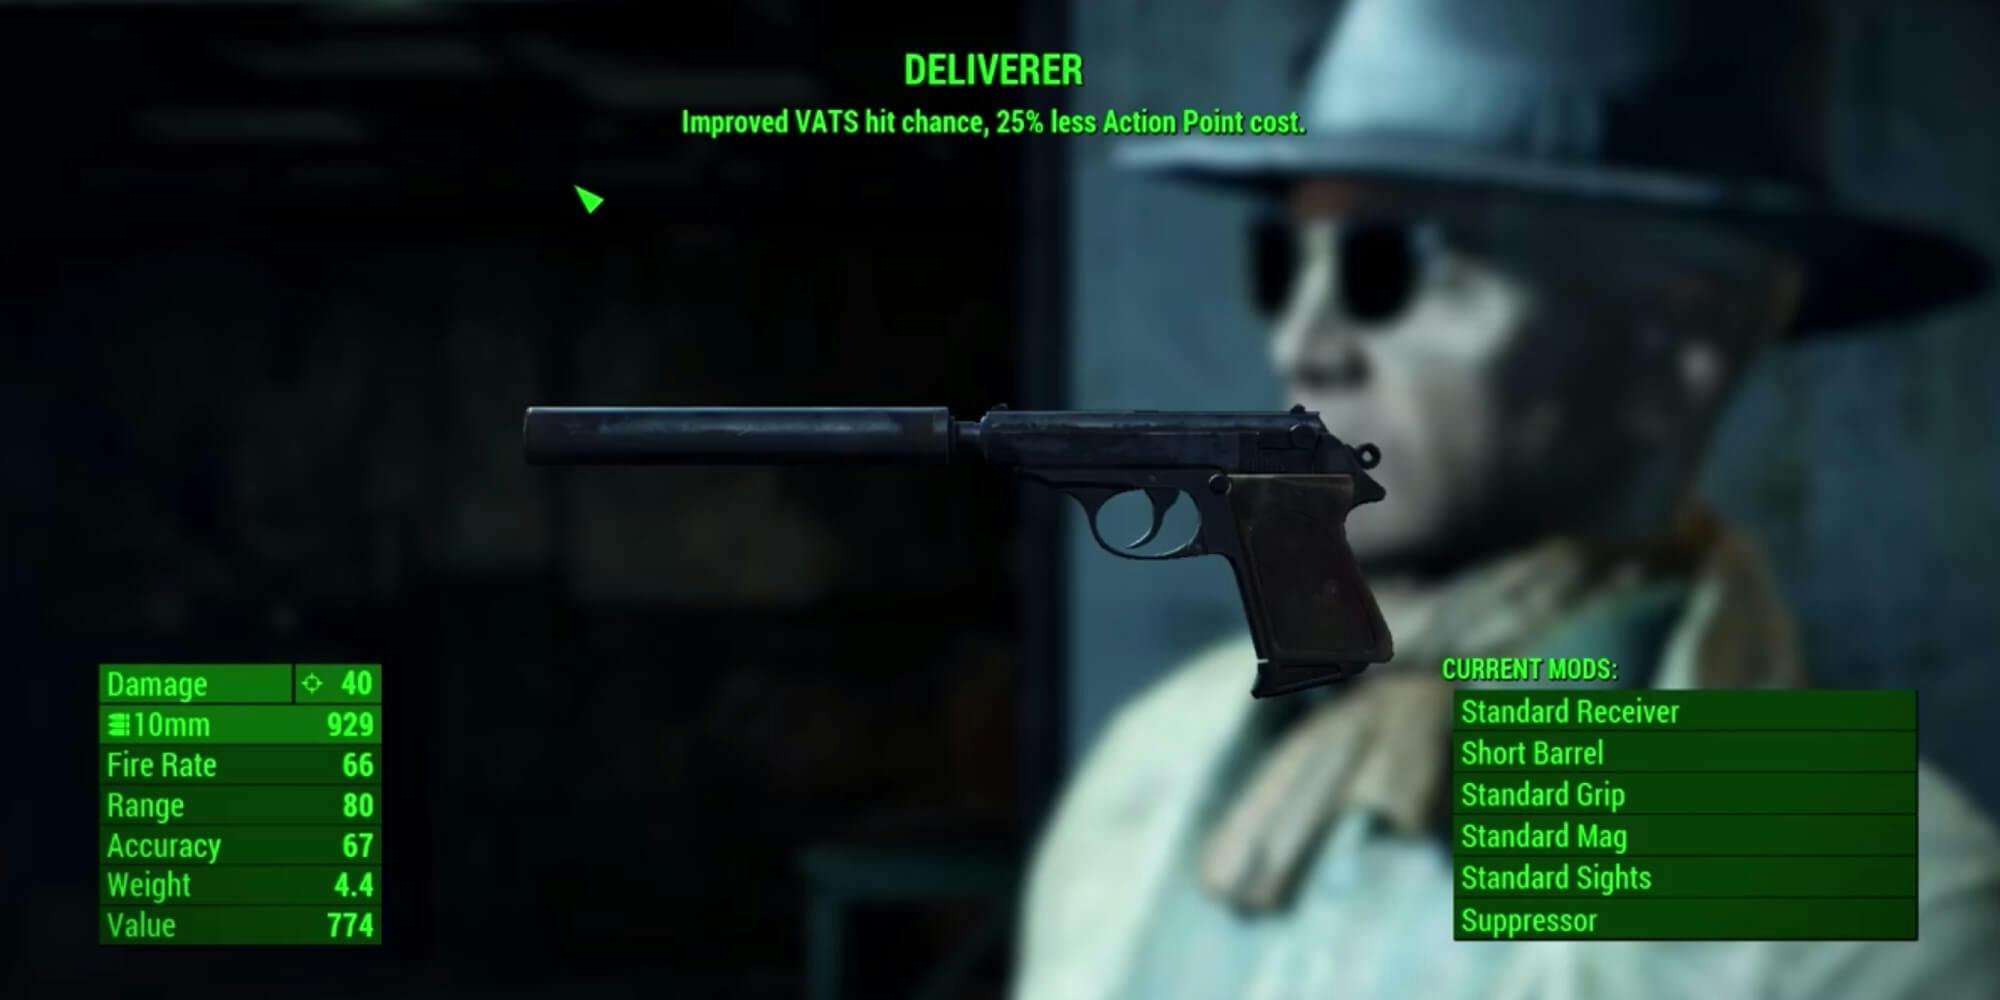 Fallout 4 weapons - deliverer